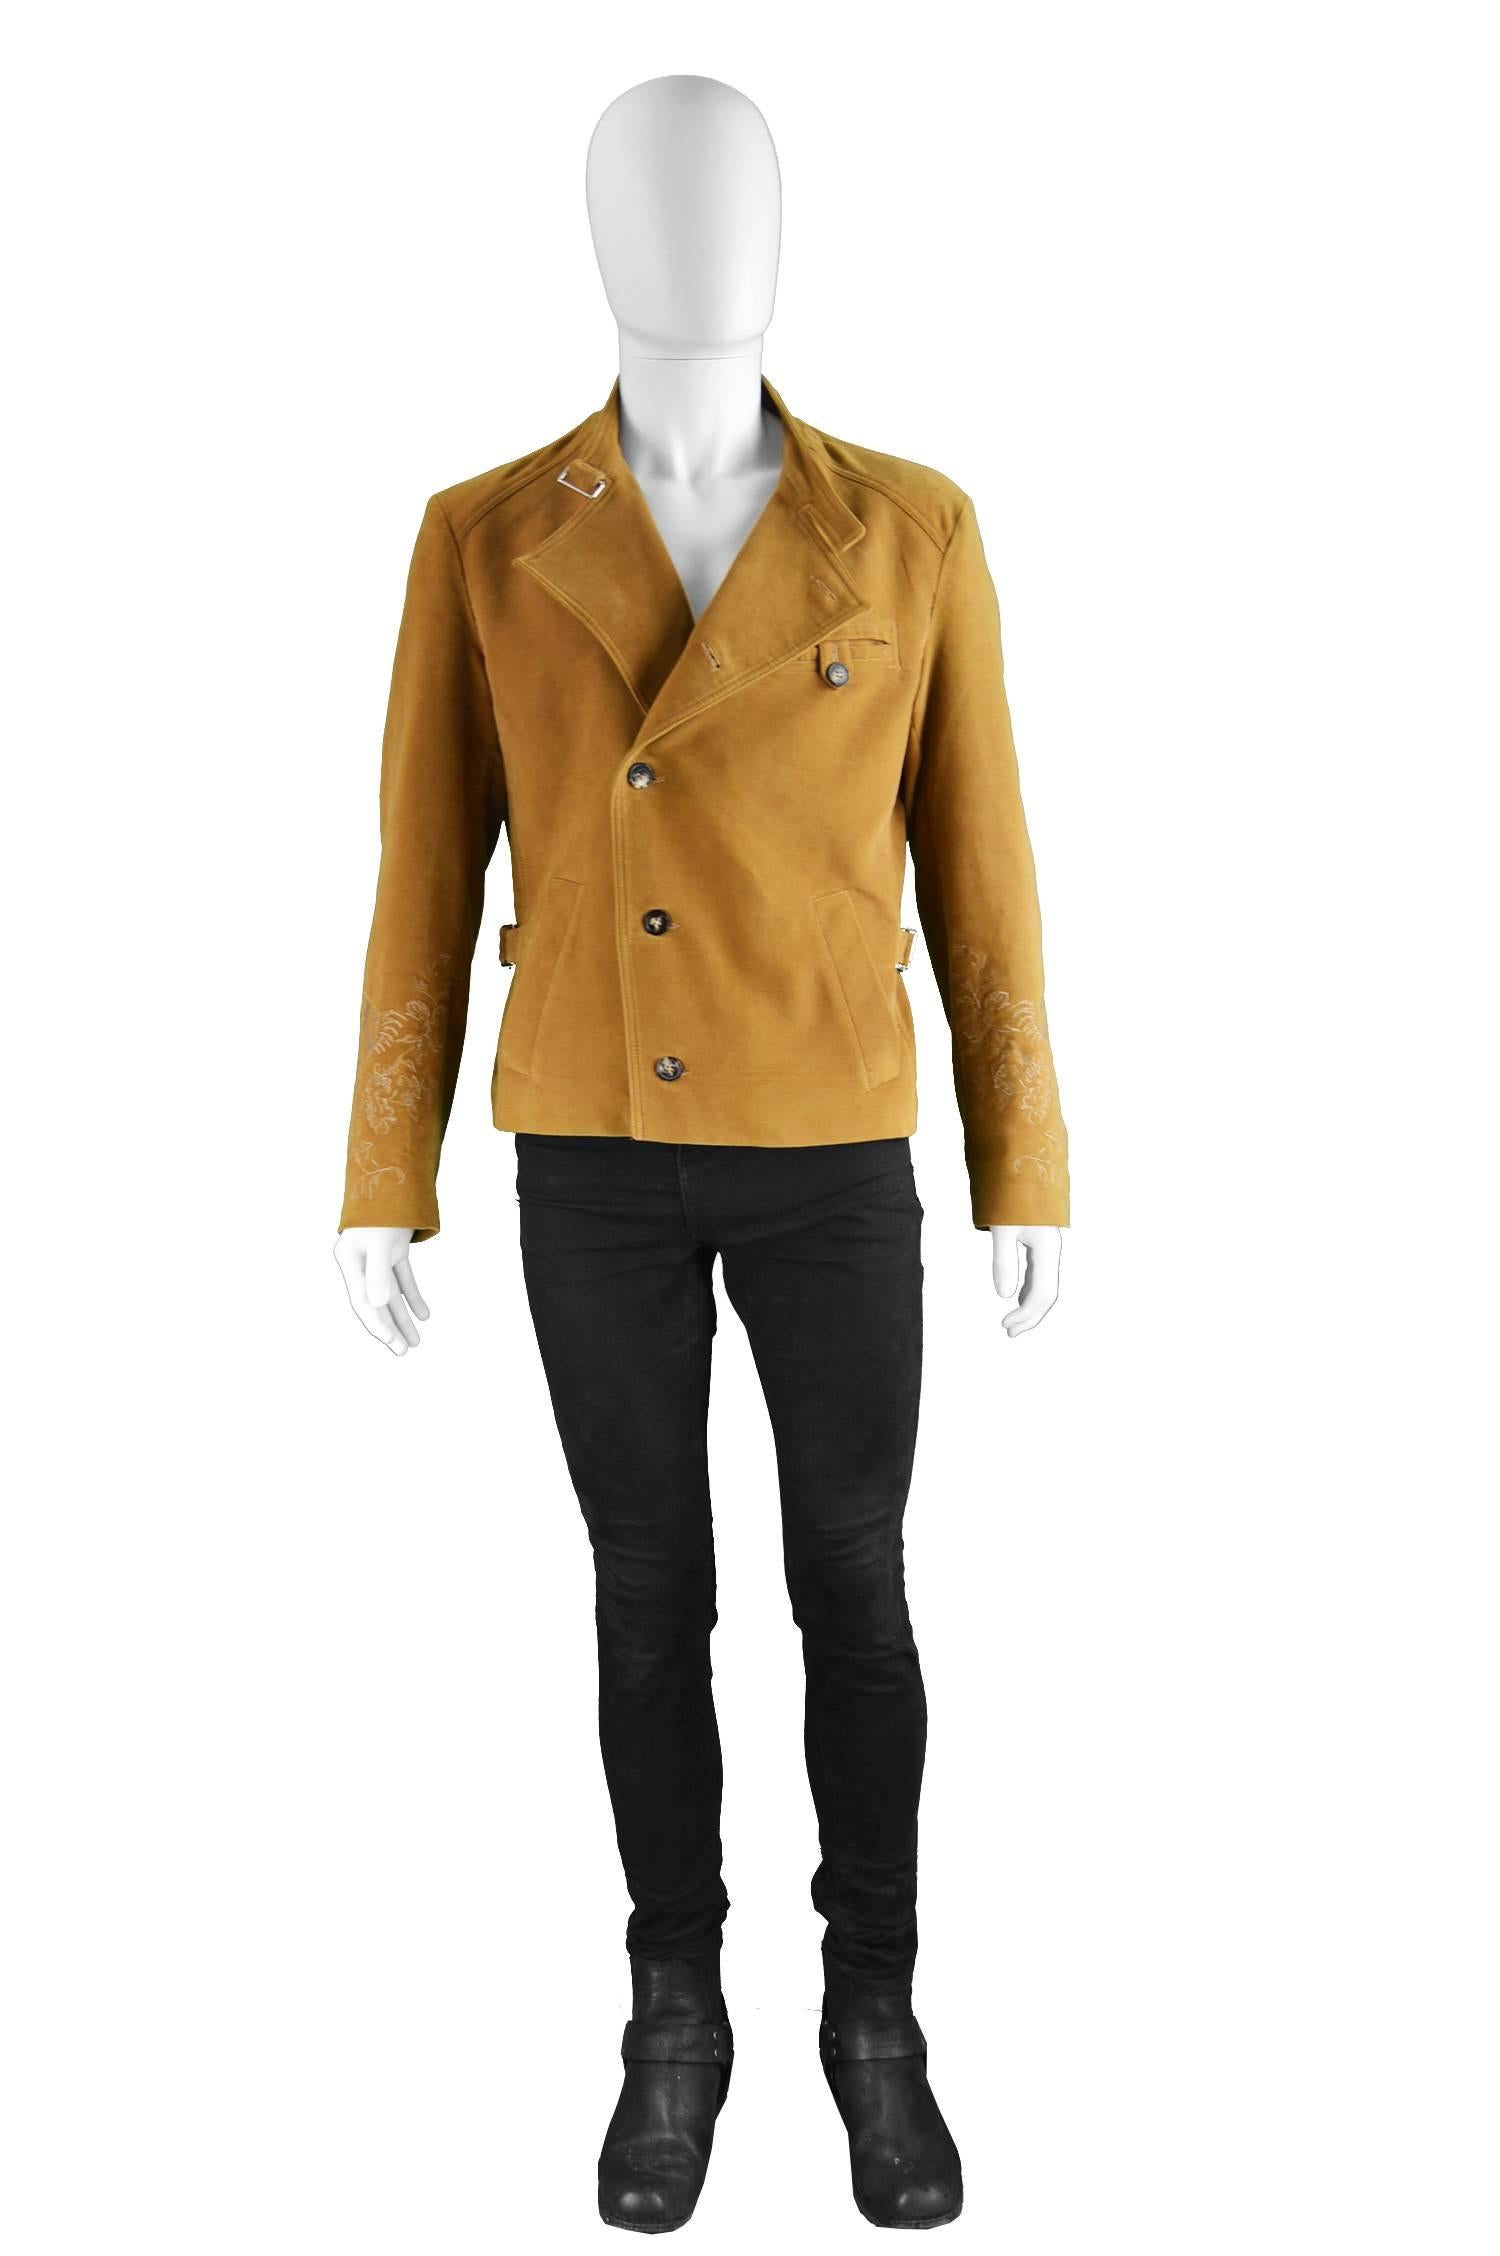 Christian Lacroix Men's Embroidered Camel Velvet Jacket with Bold Silk Lining

Estimated Size: Men's Medium to Large. Please check measurements.
Chest -44” / 112cm (please allow a couple of inches room for movement)
Length (Shoulder to Hem) - 23” /